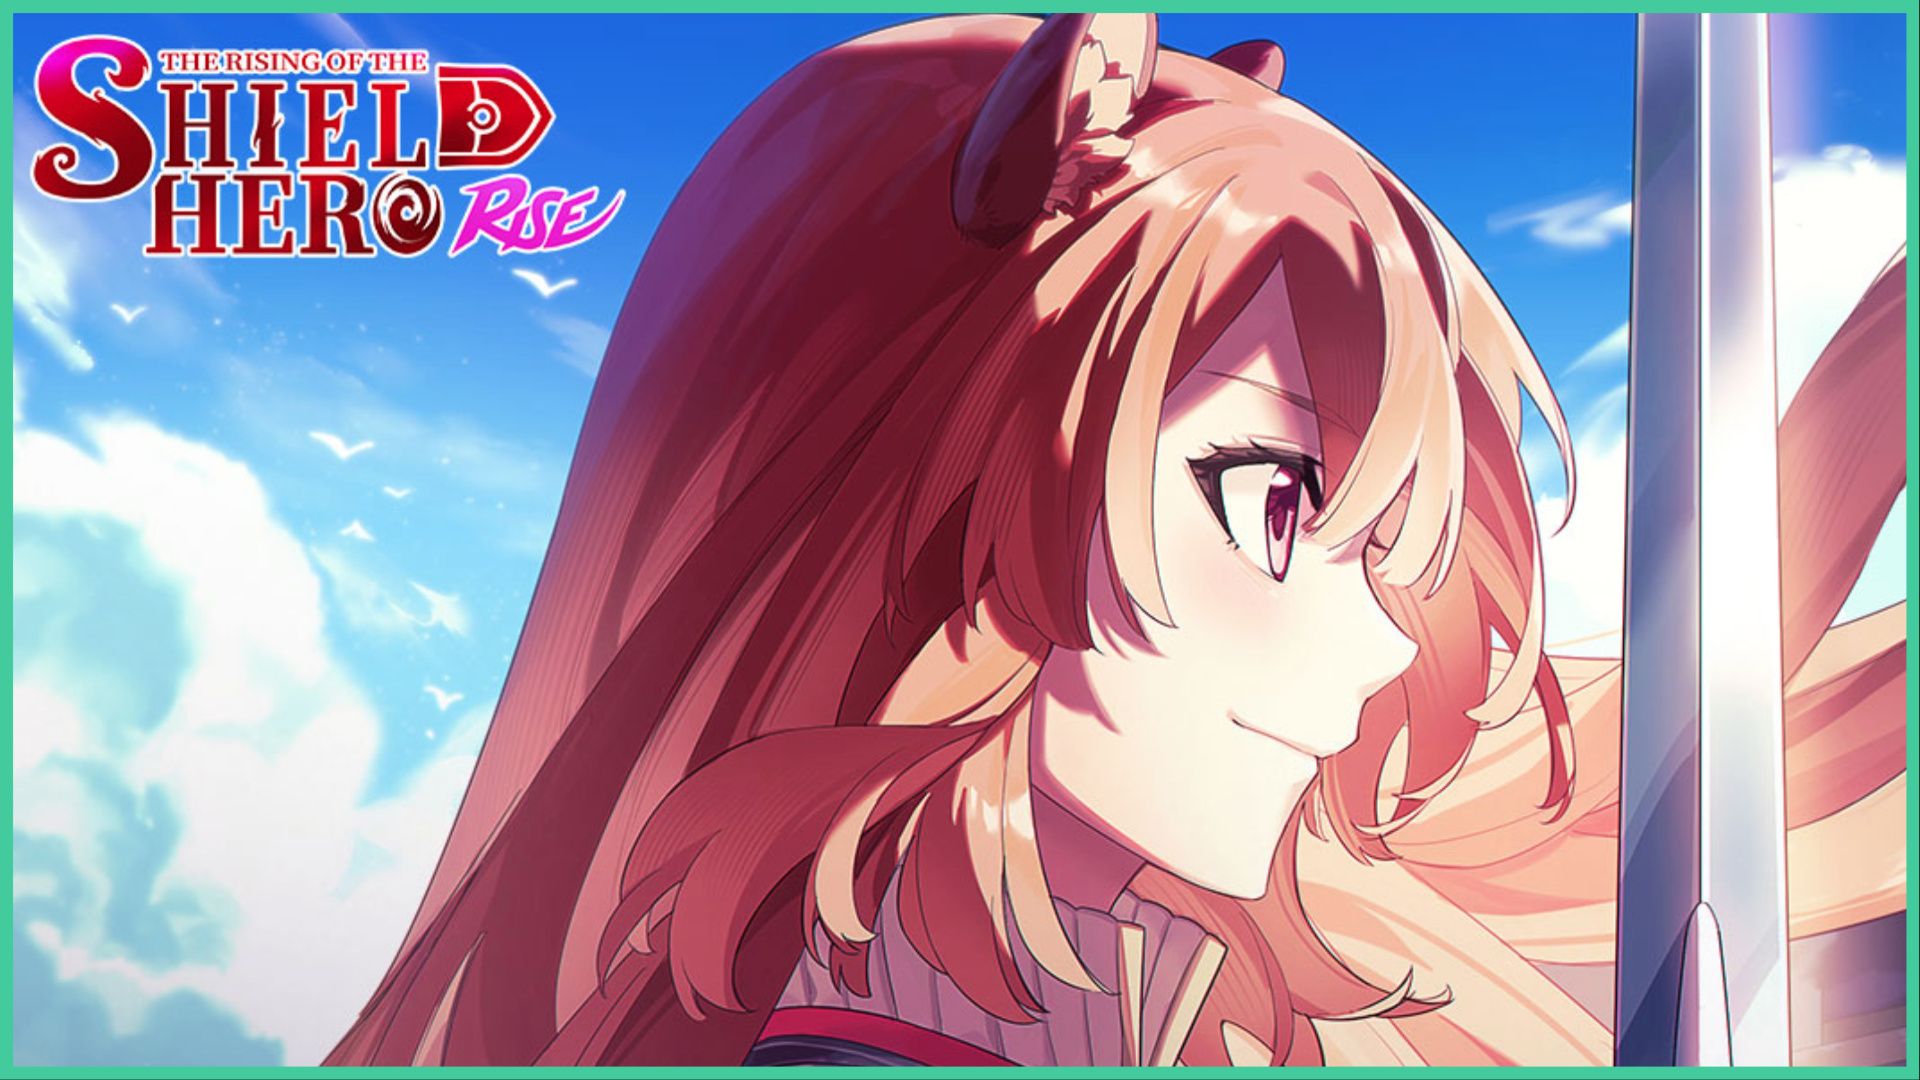 feature image for our shield hero RISE codes, the image features promo art of raphtalia from the game and the rising of the shield hero series, she is facing to the right as she has a determined smile while holding a sword, the game's logo is also to the left